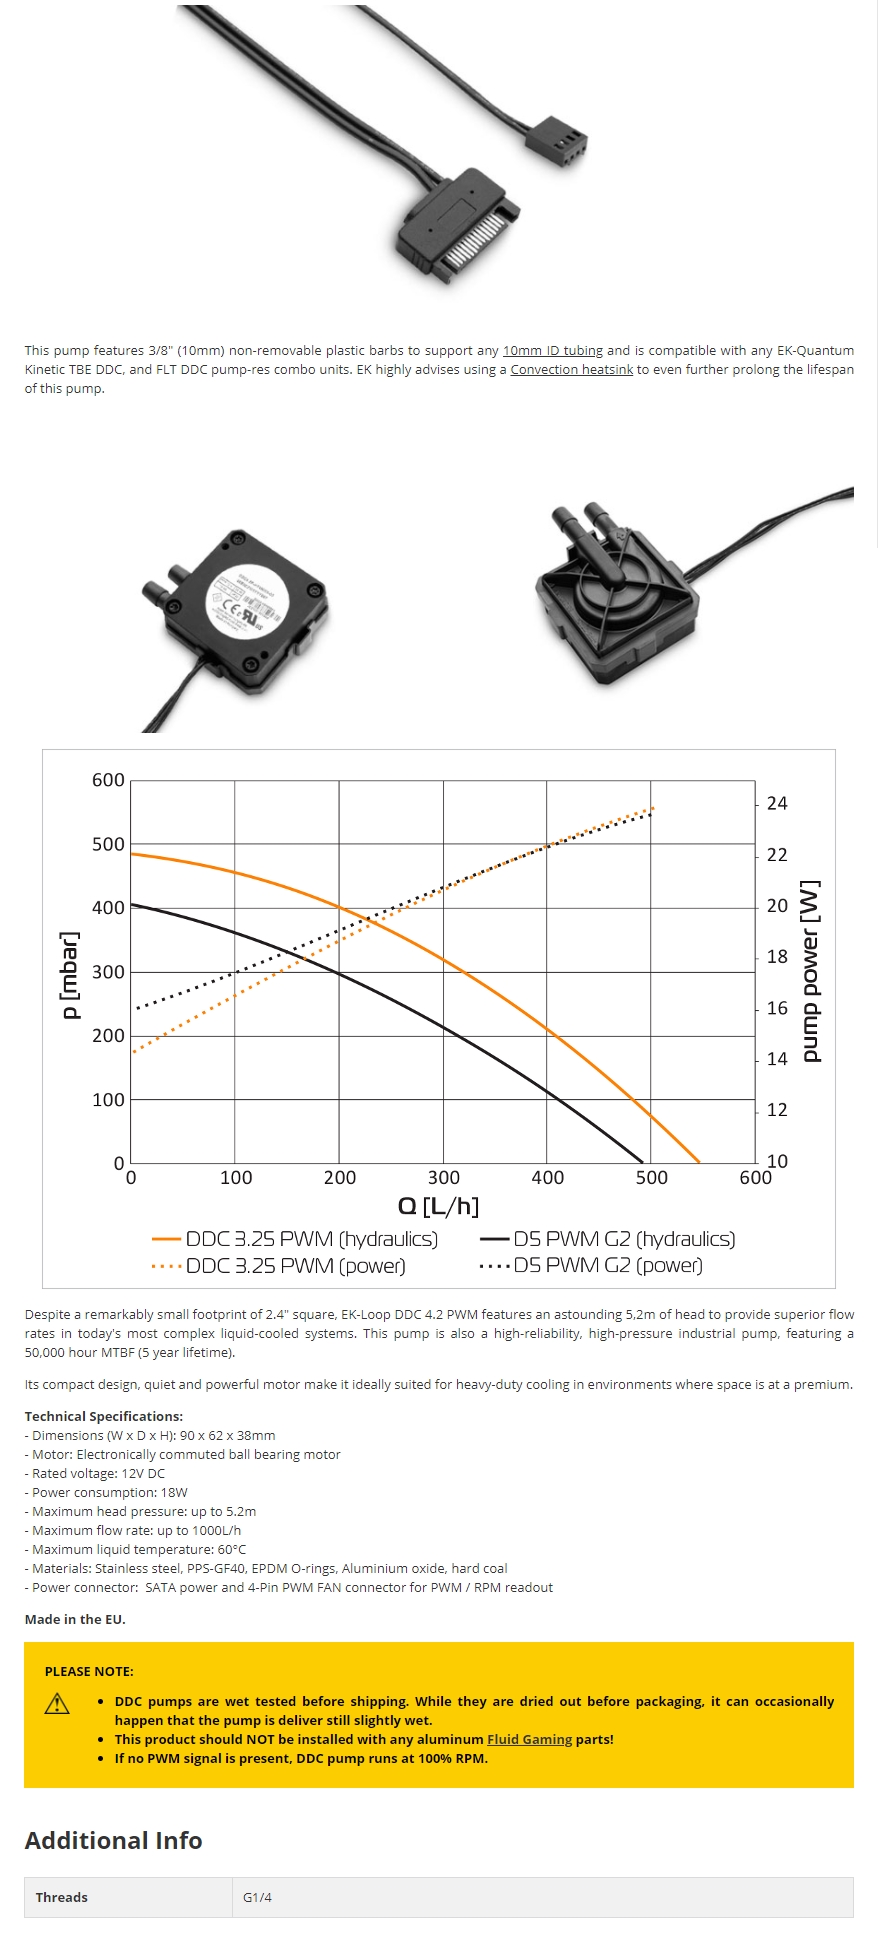 A large marketing image providing additional information about the product EK Loop DDC 4.2 PWM Pump - Additional alt info not provided